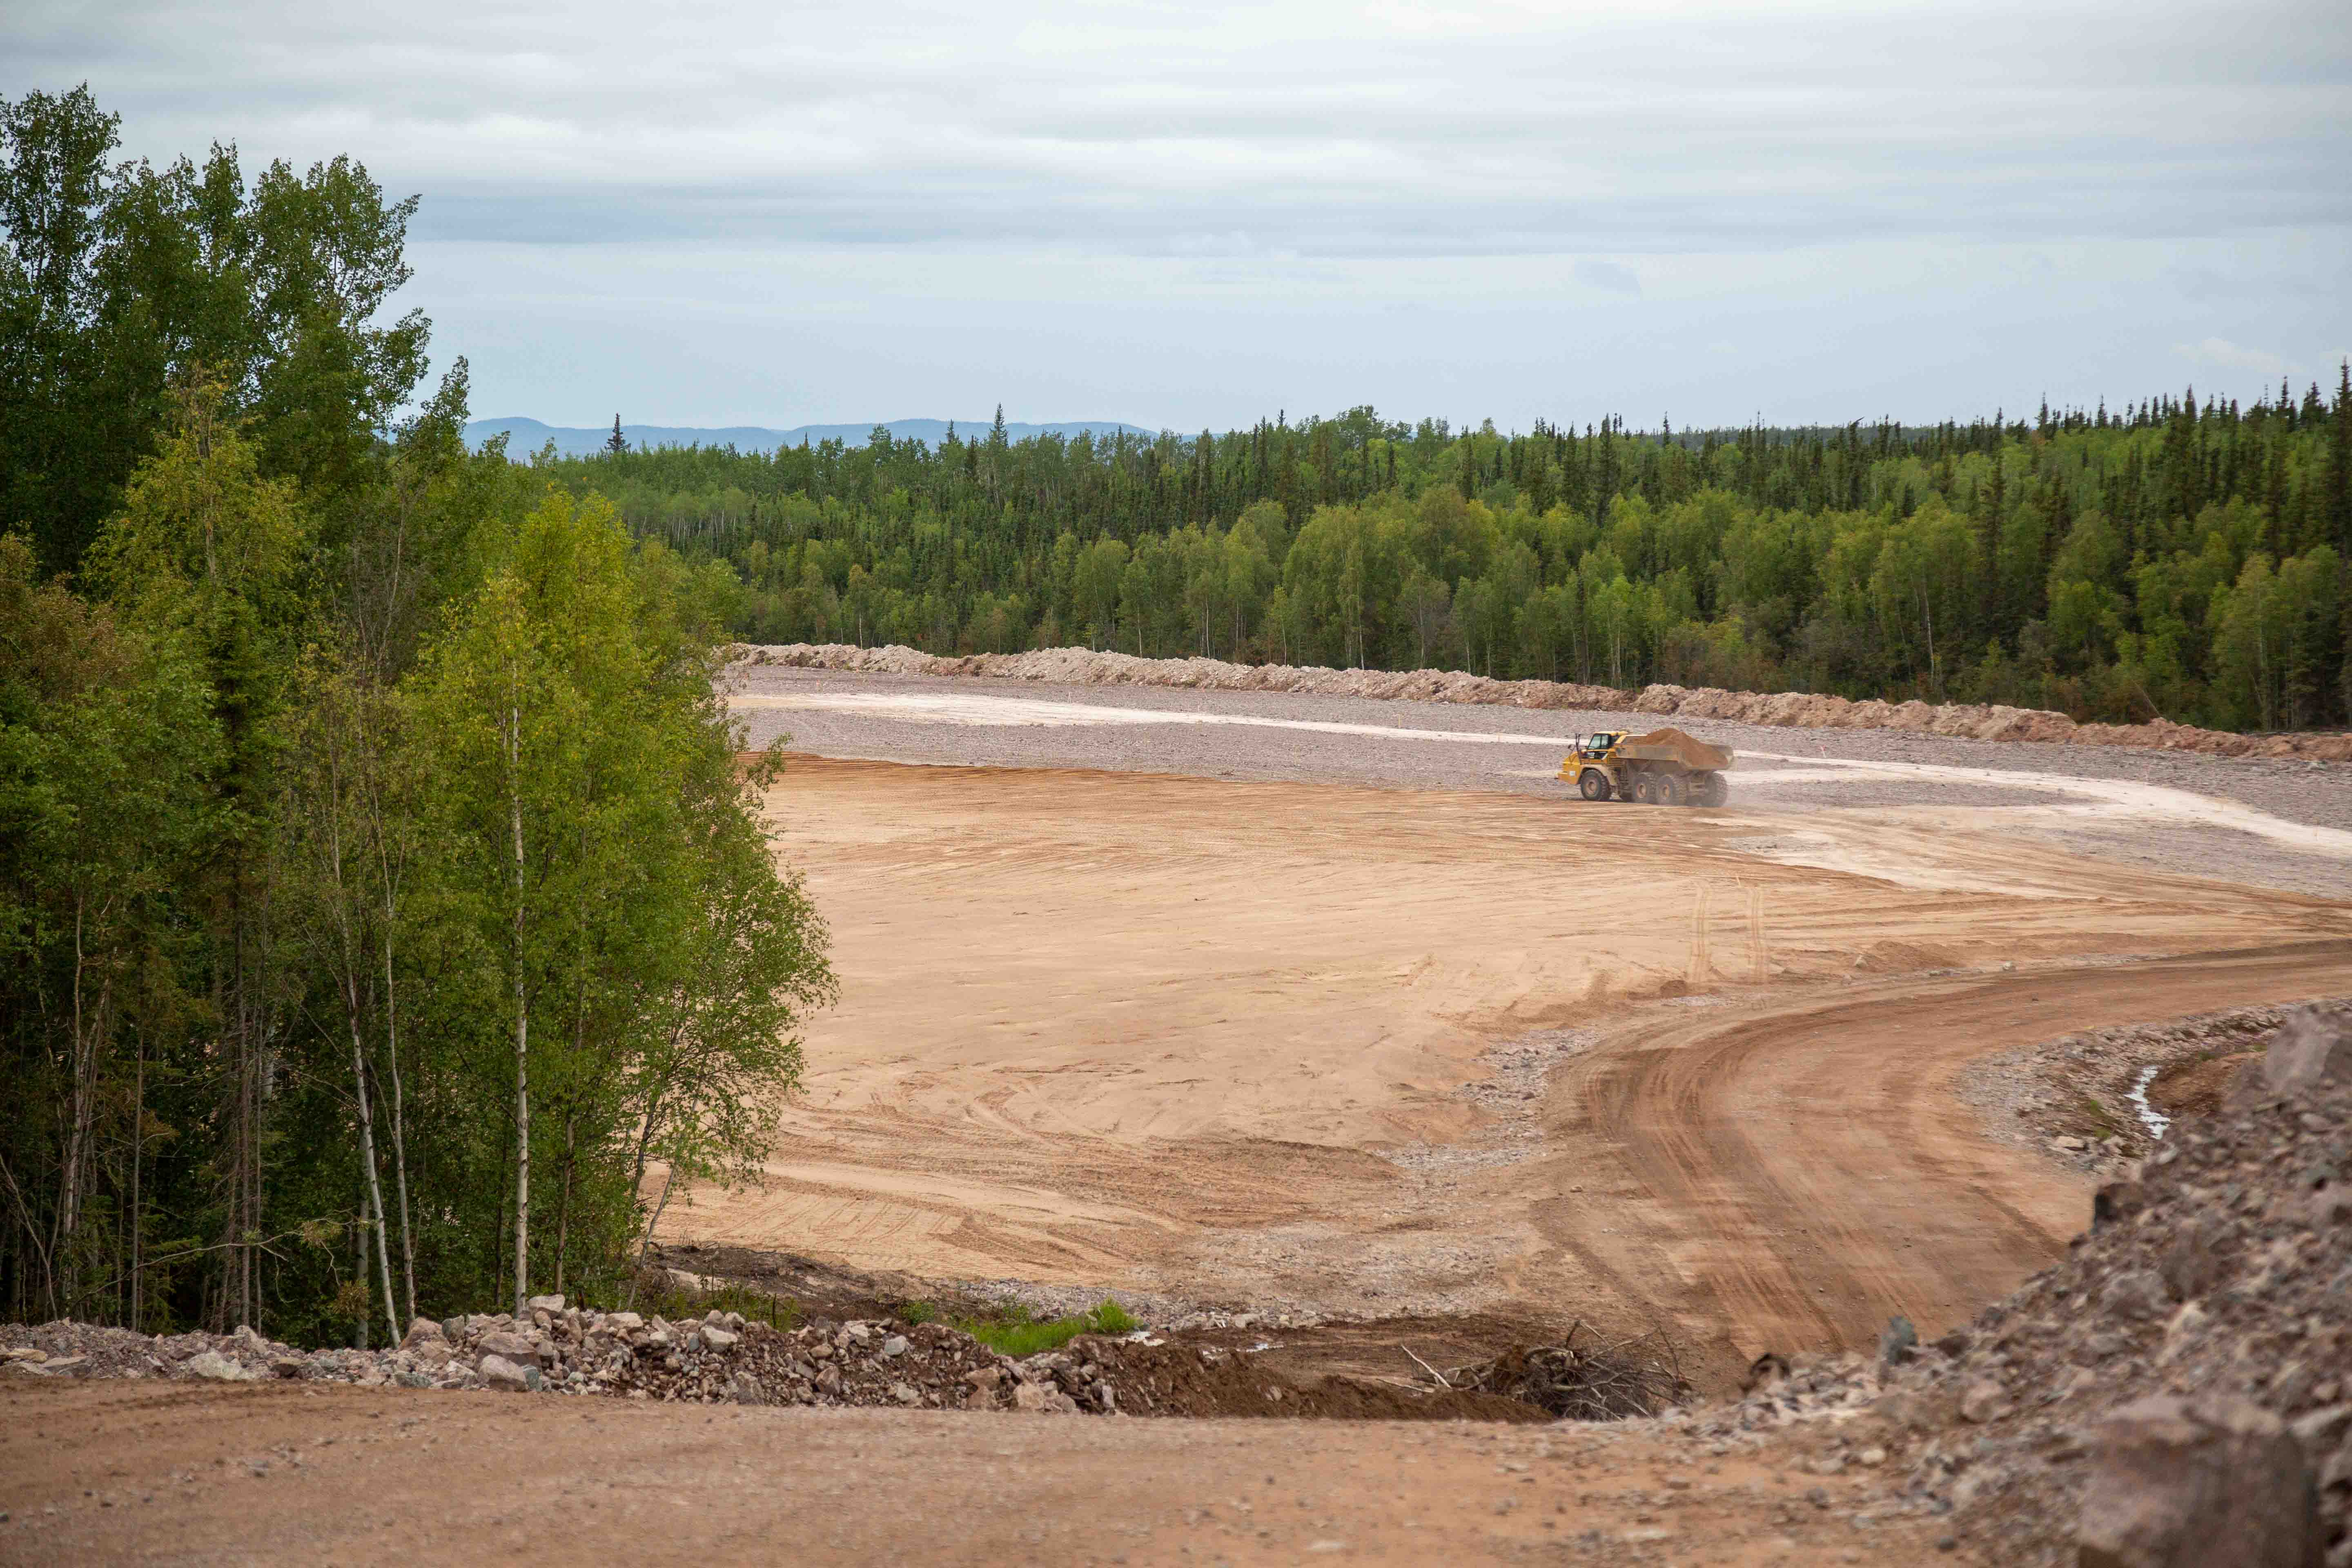 Remediation work in 2019 at Gunnar Central Tailings